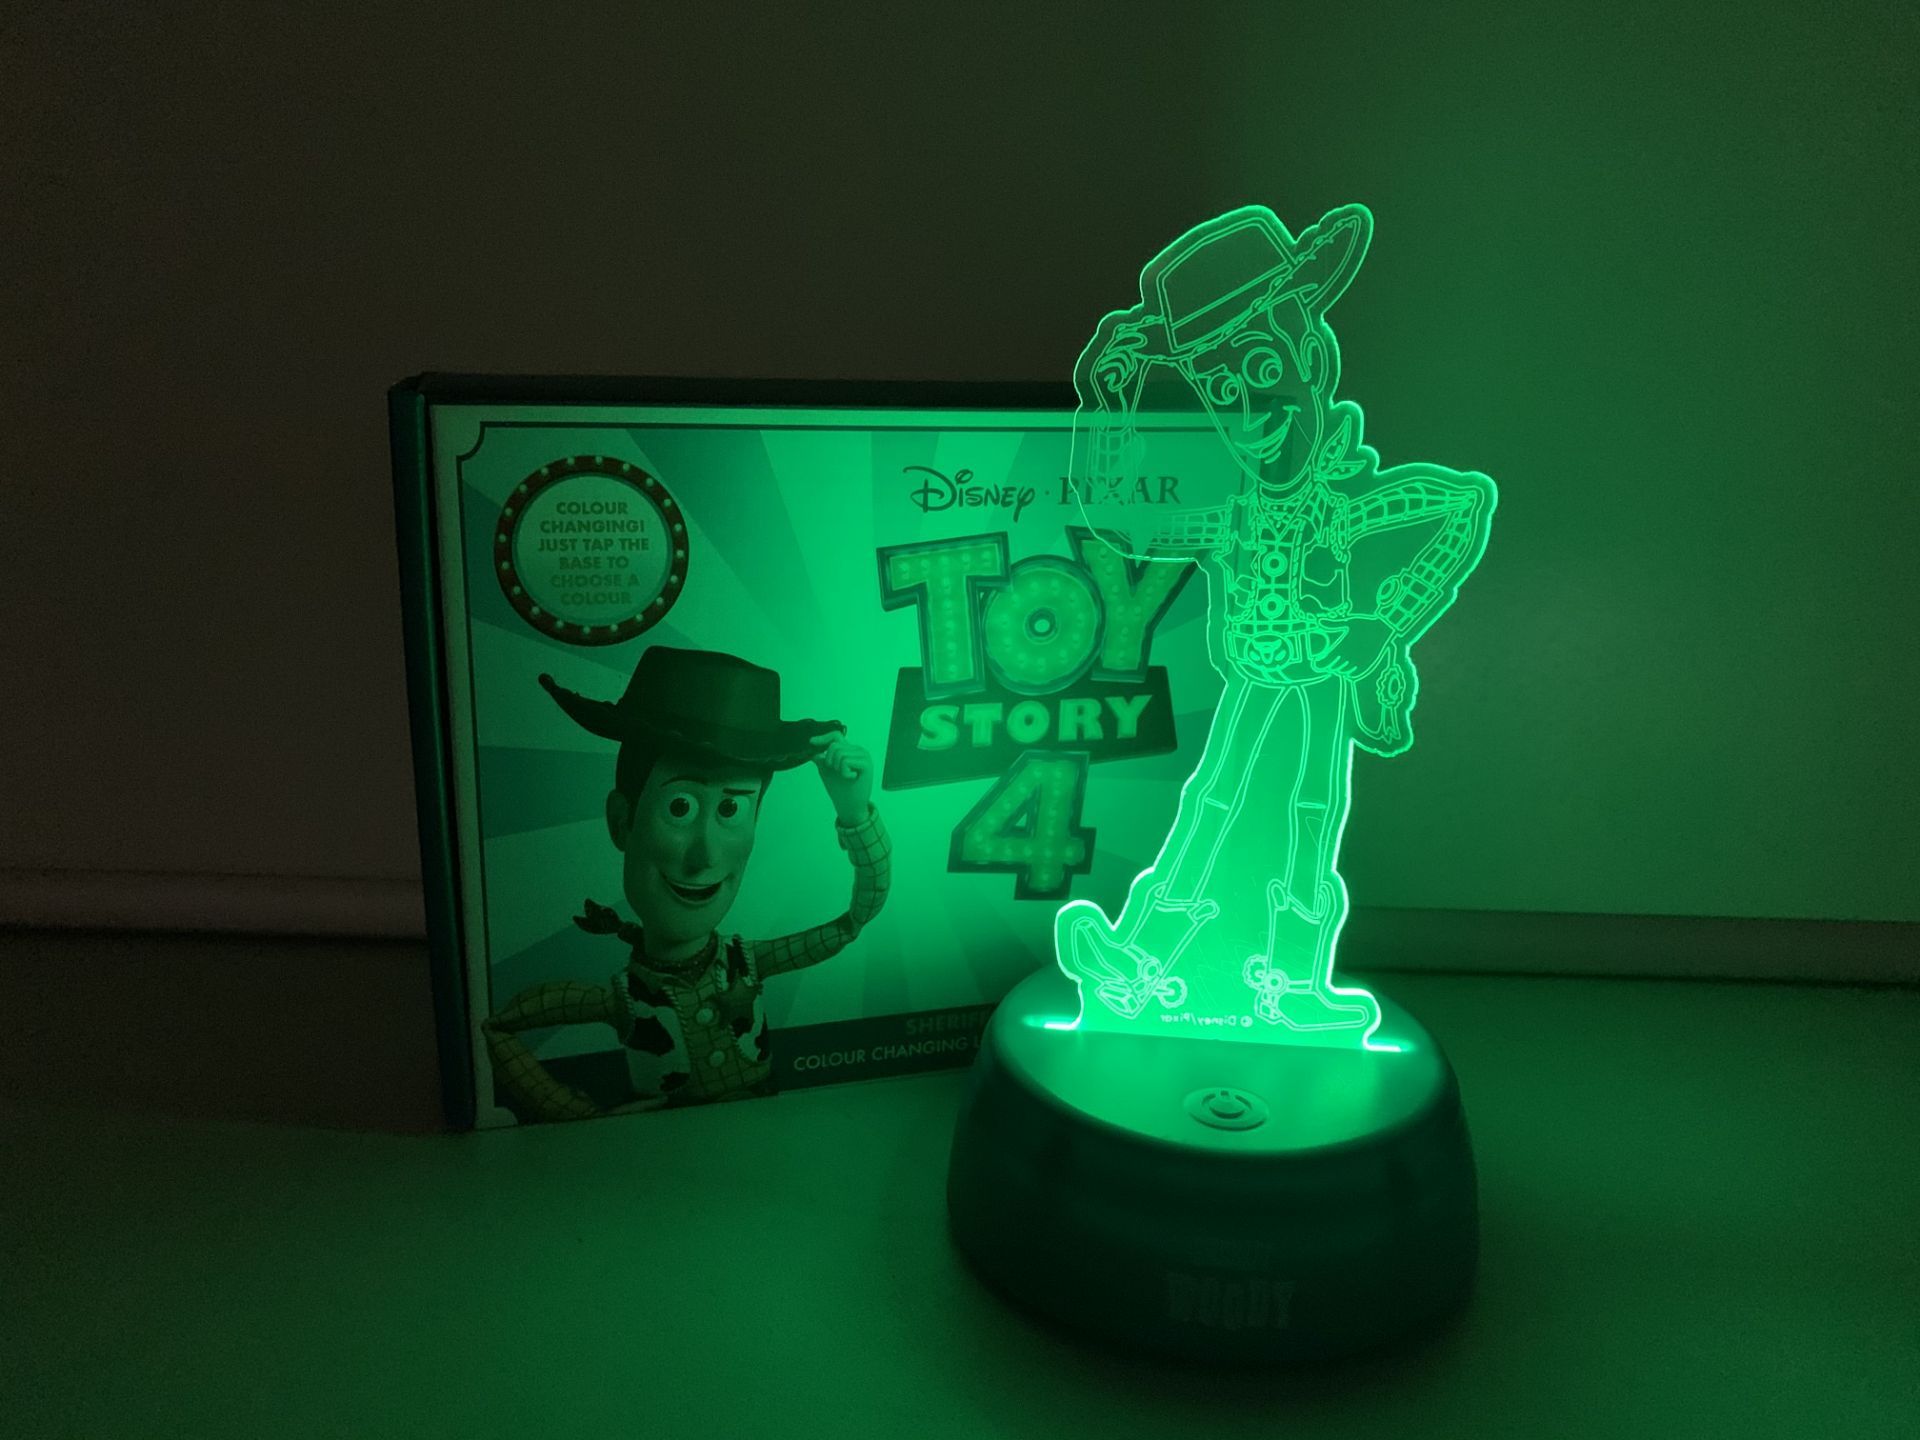 4 X BRAND NEW RETAIL BOXED TOY STORY 4 COLOUR CHANGING NIGHT LAMPS (TOUCH BASE LAMPS)